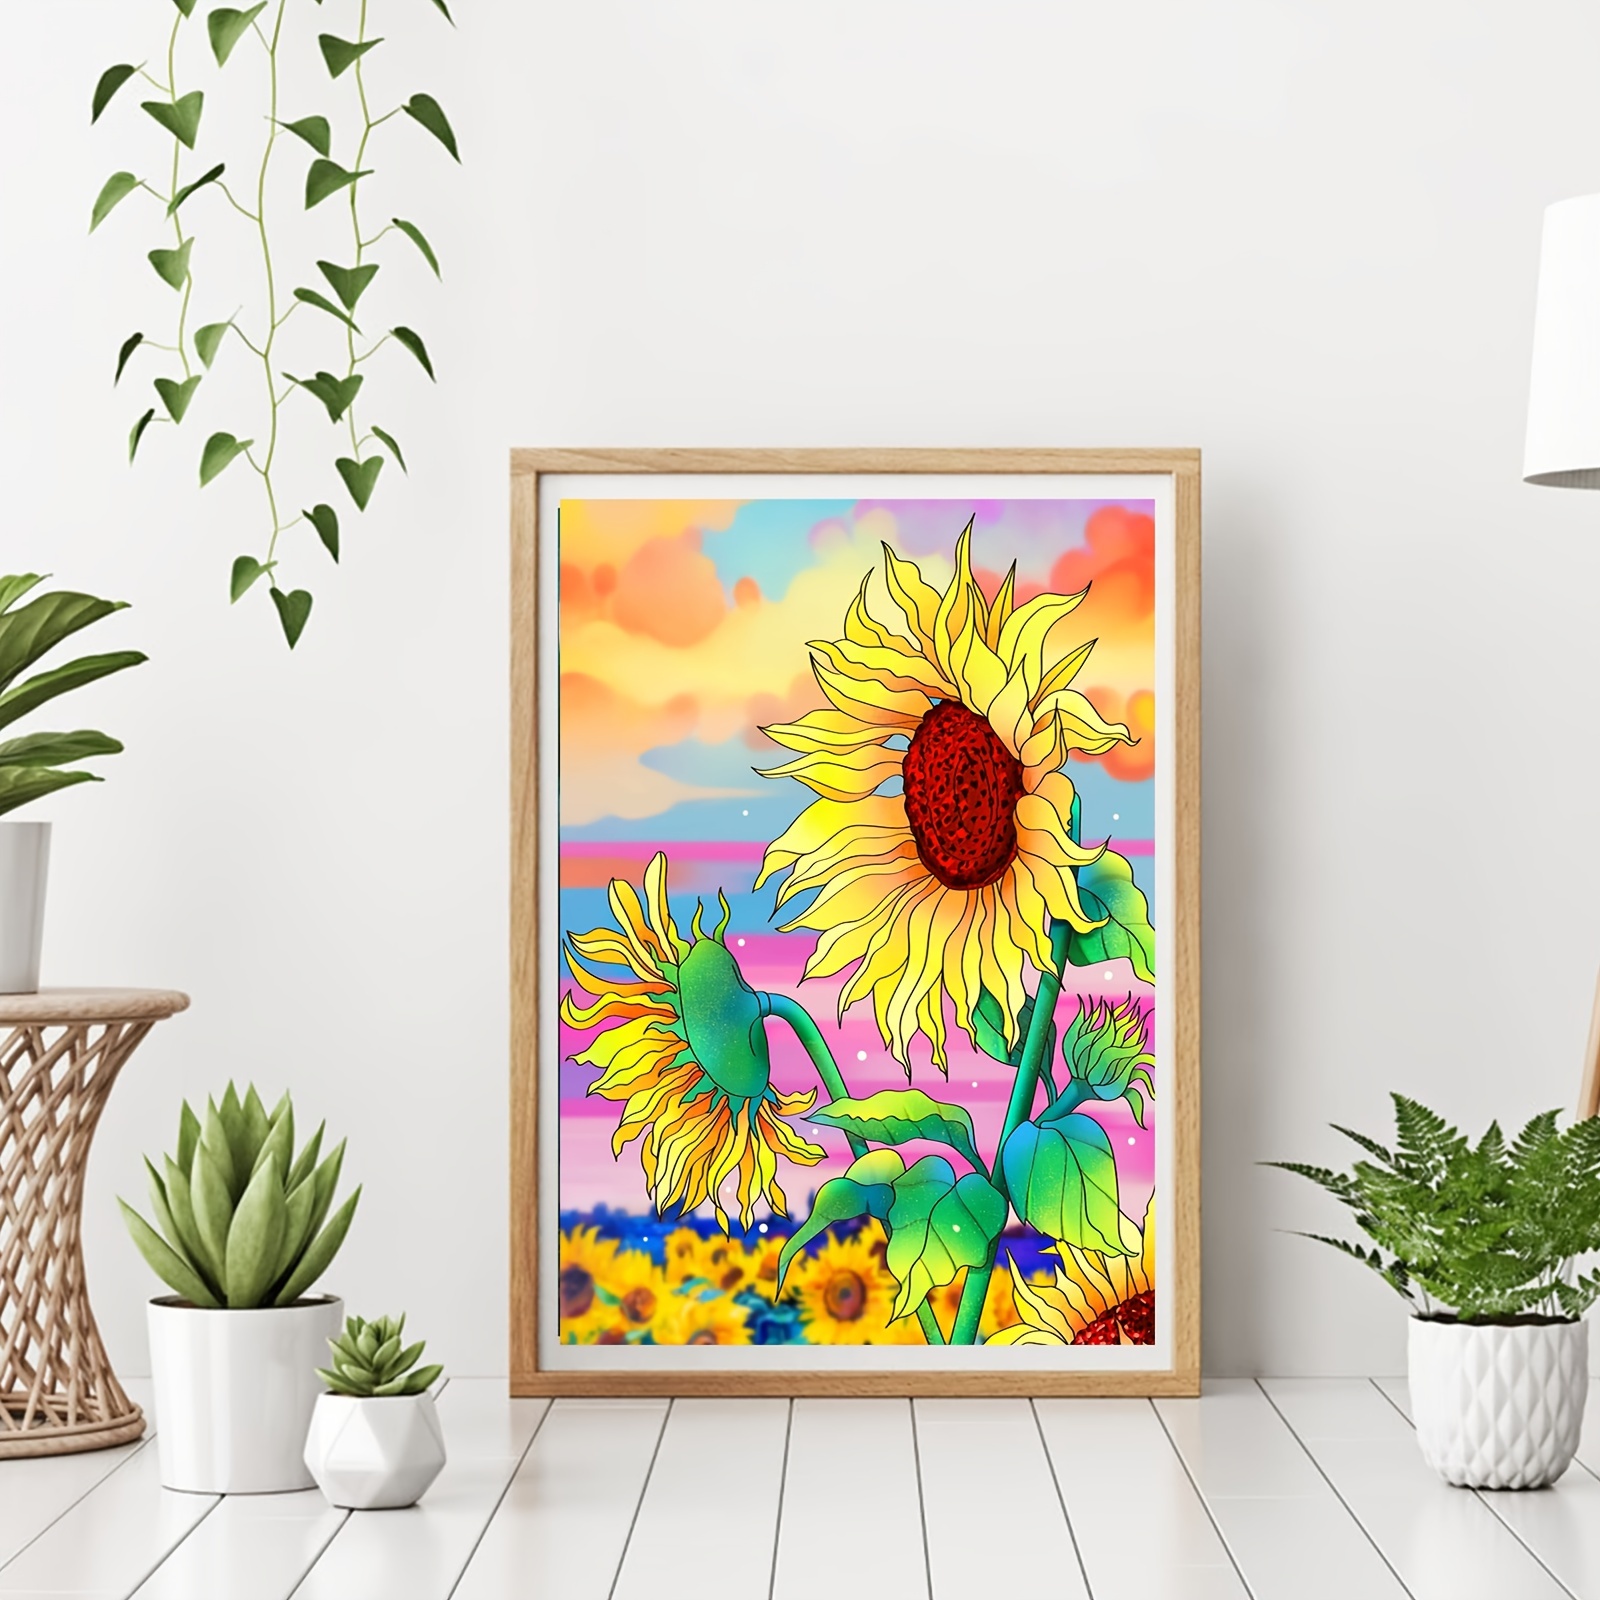 Sunflower Diamond Painting Kits for Adults - Art Beginner, 5D DIY Full  Drill Dots Paintings with Diamonds Gem and Crafts Home Wall Decor  11.8x15.7inch